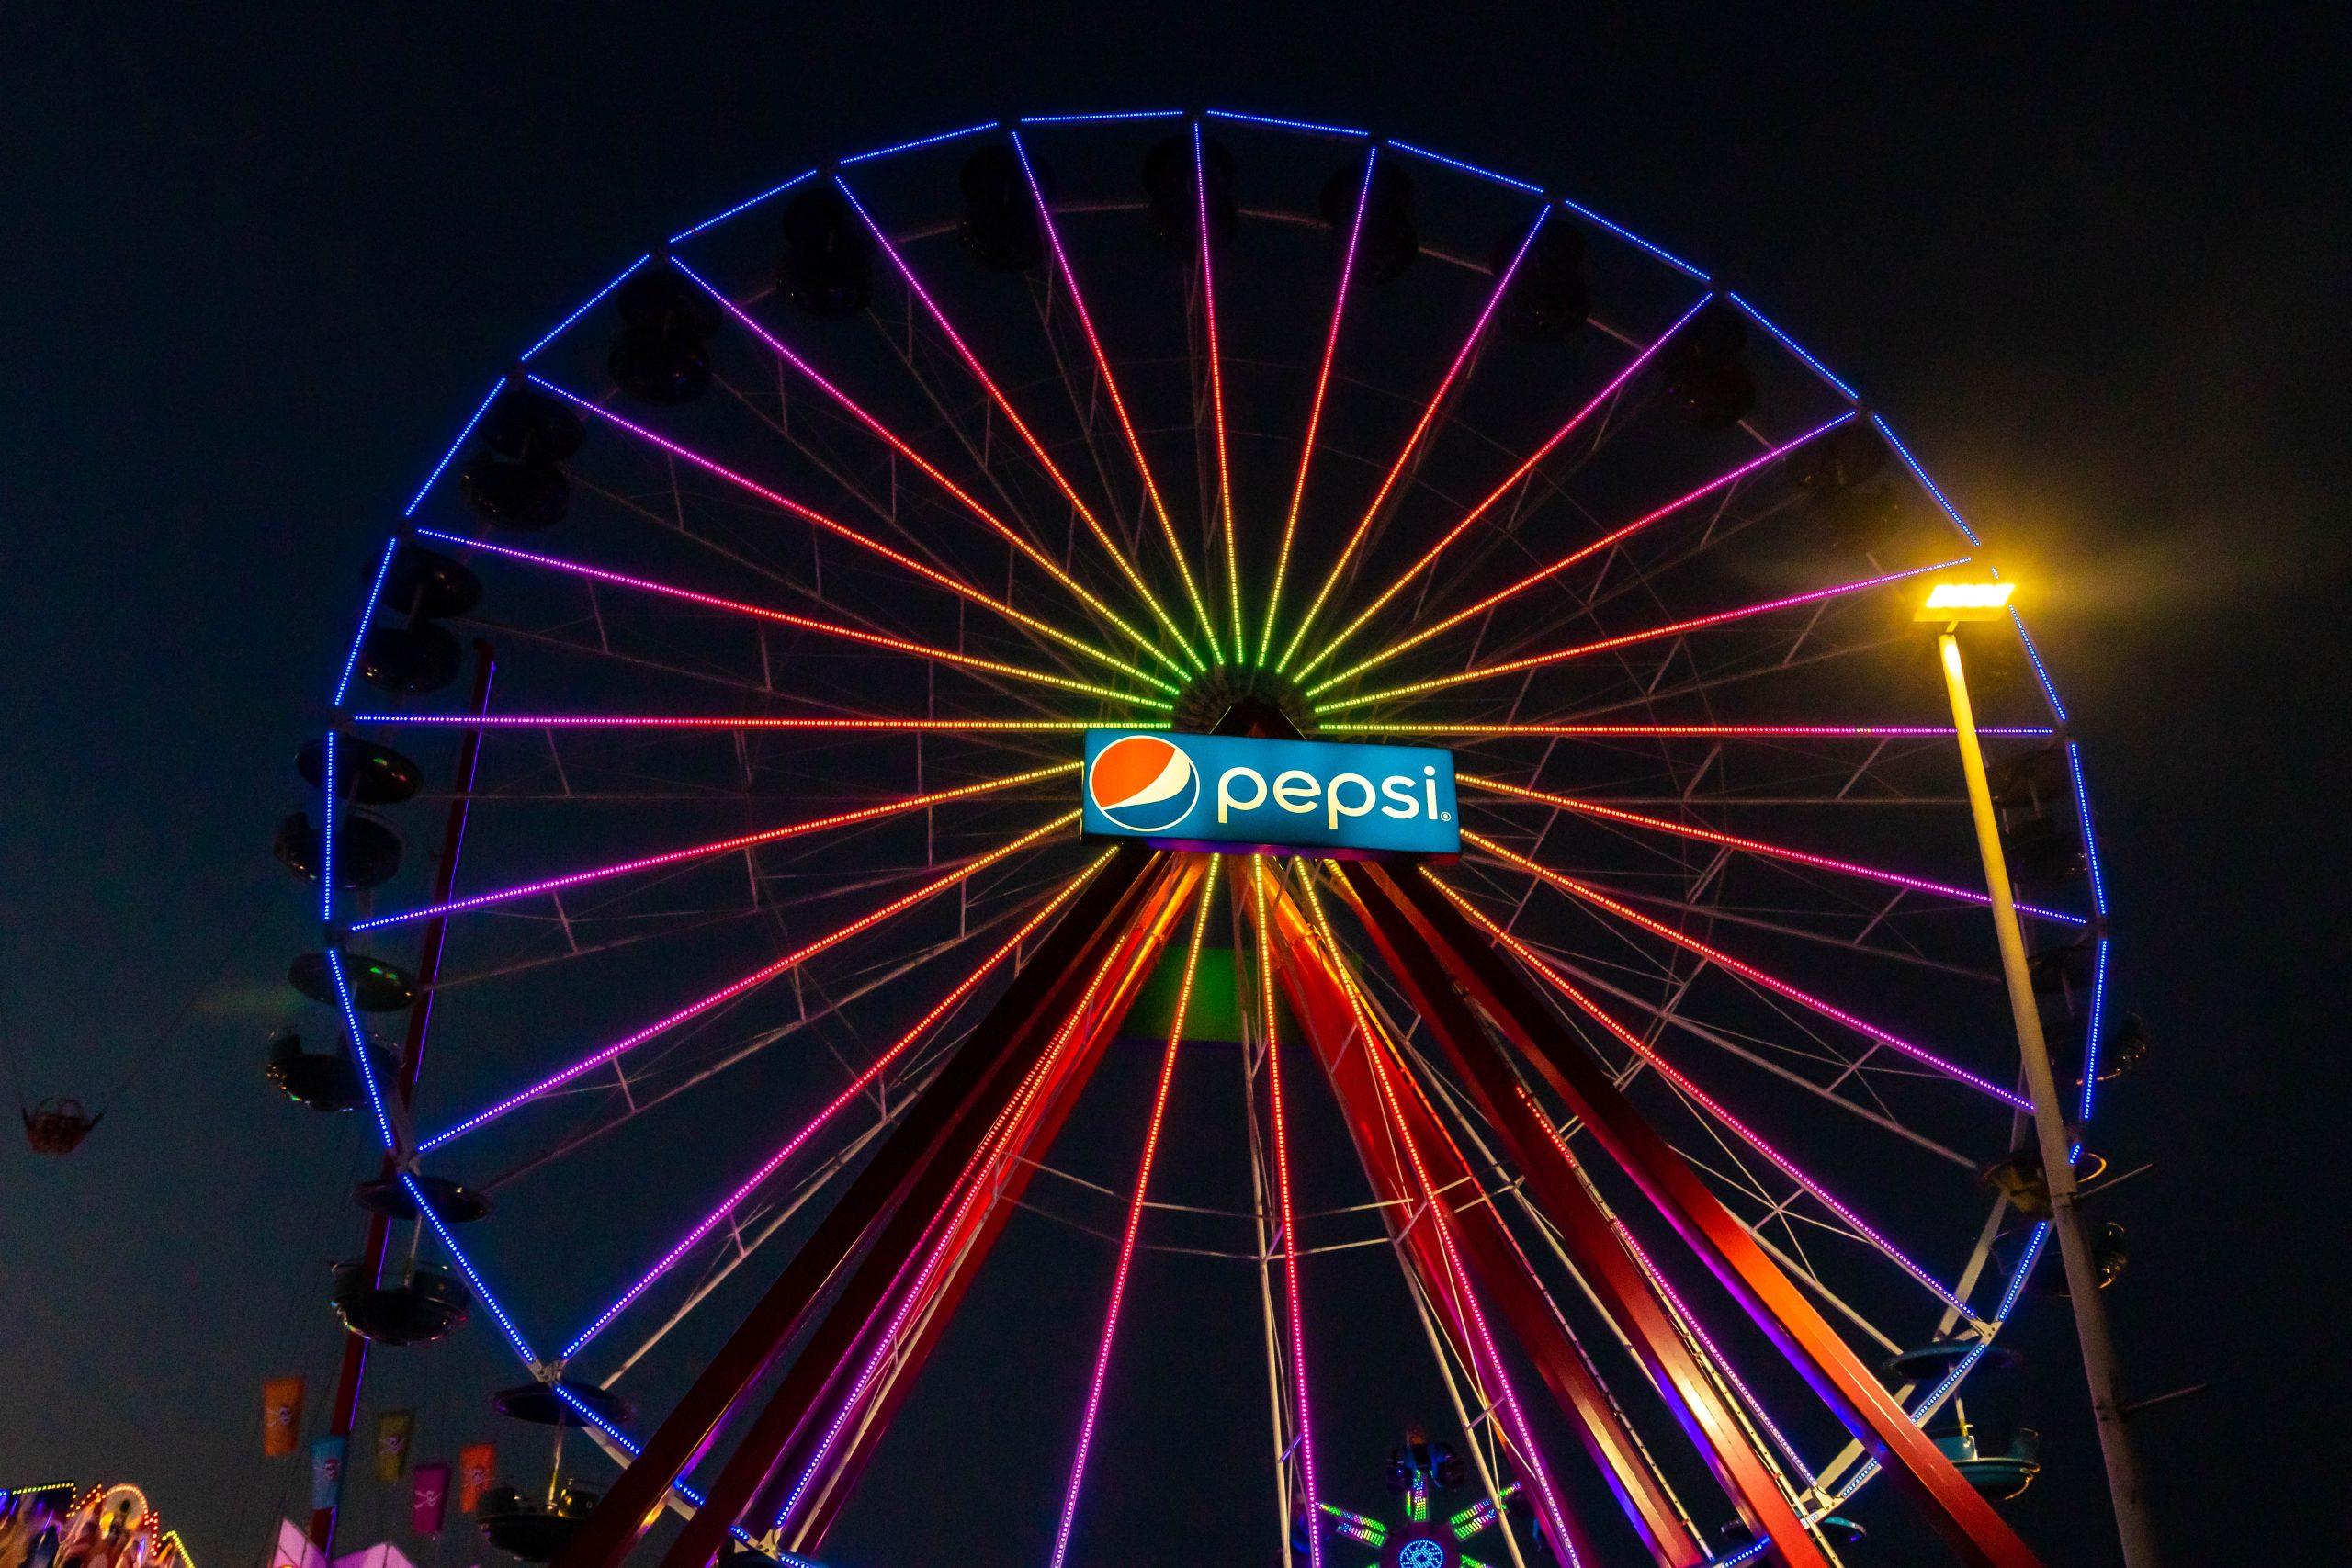 Giant Ferris Wheel with rainbow LED lights and a Pepsi Sign in the Middle